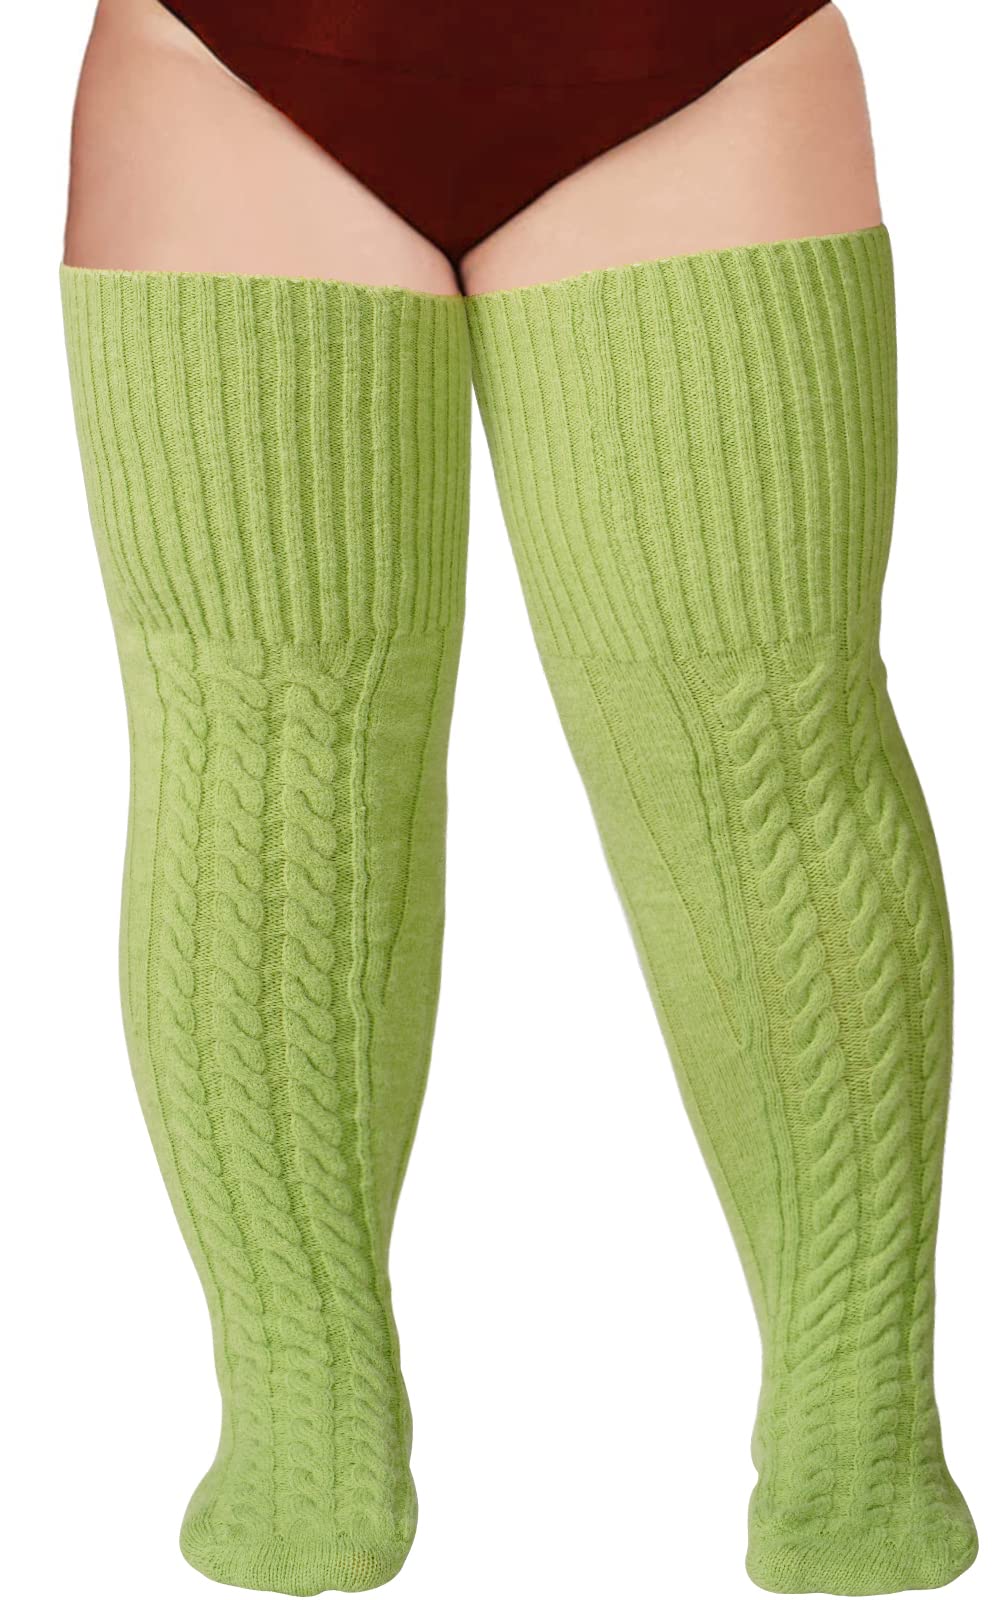 Wool Plus Size Thigh High Socks For Thick Thighs-Avocado Green - Moon Wood